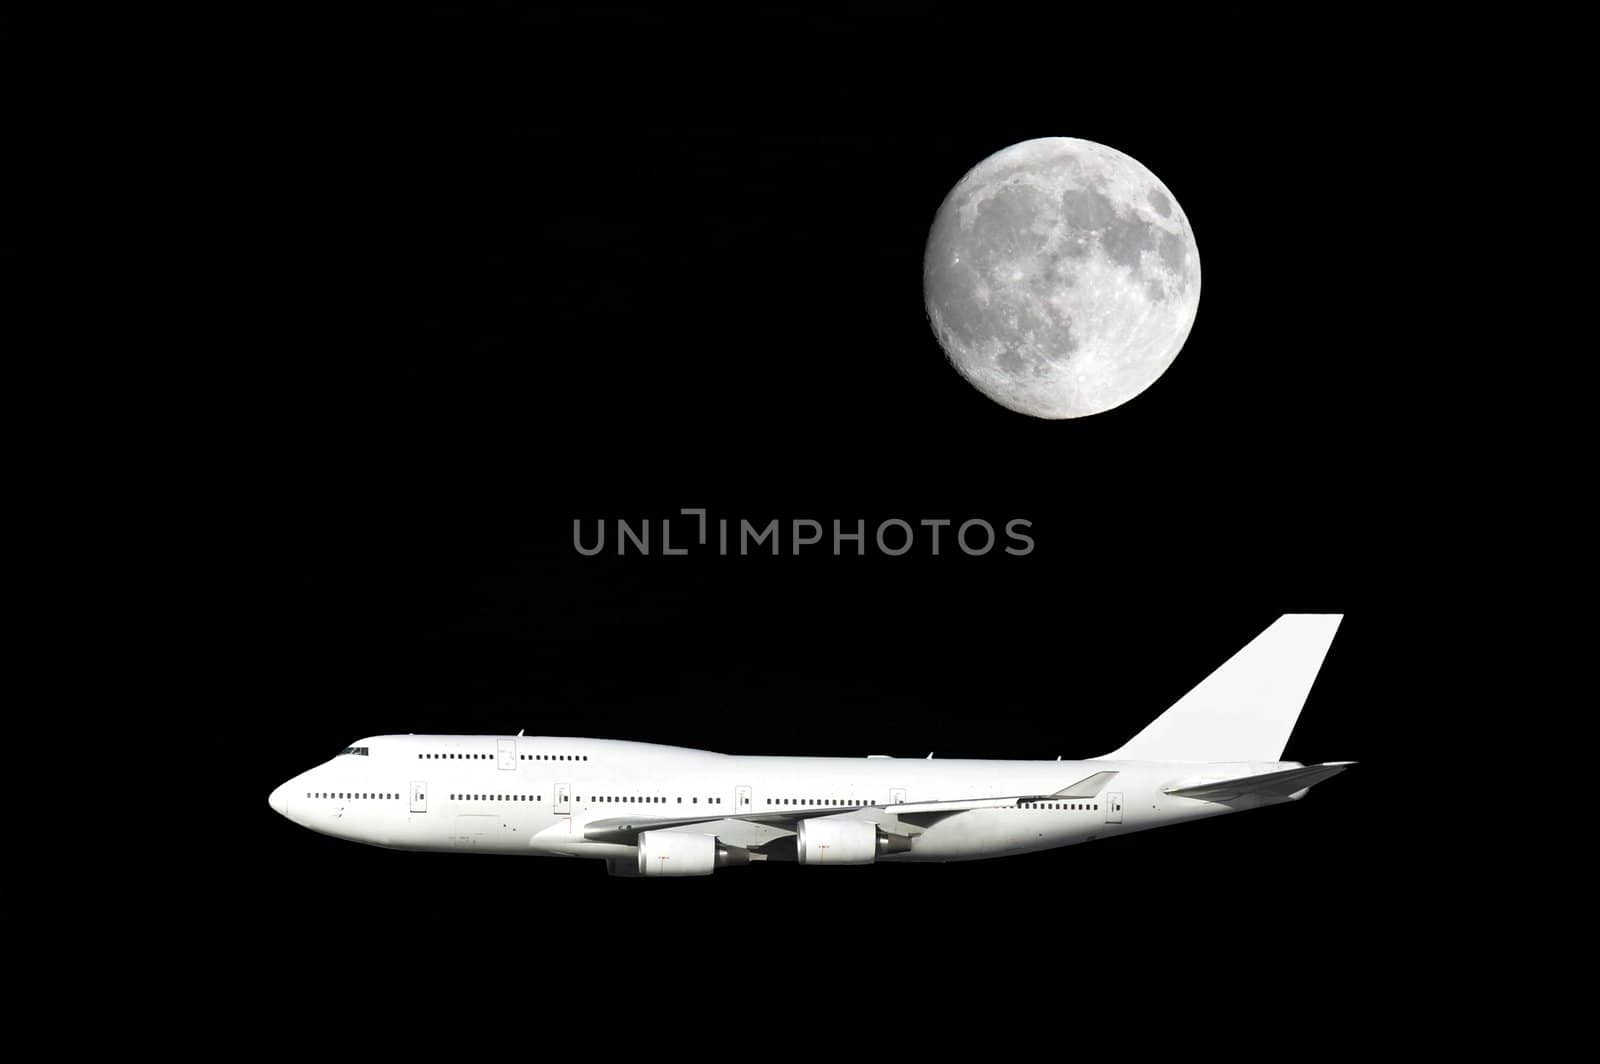 Large airliner flying under a full moon.